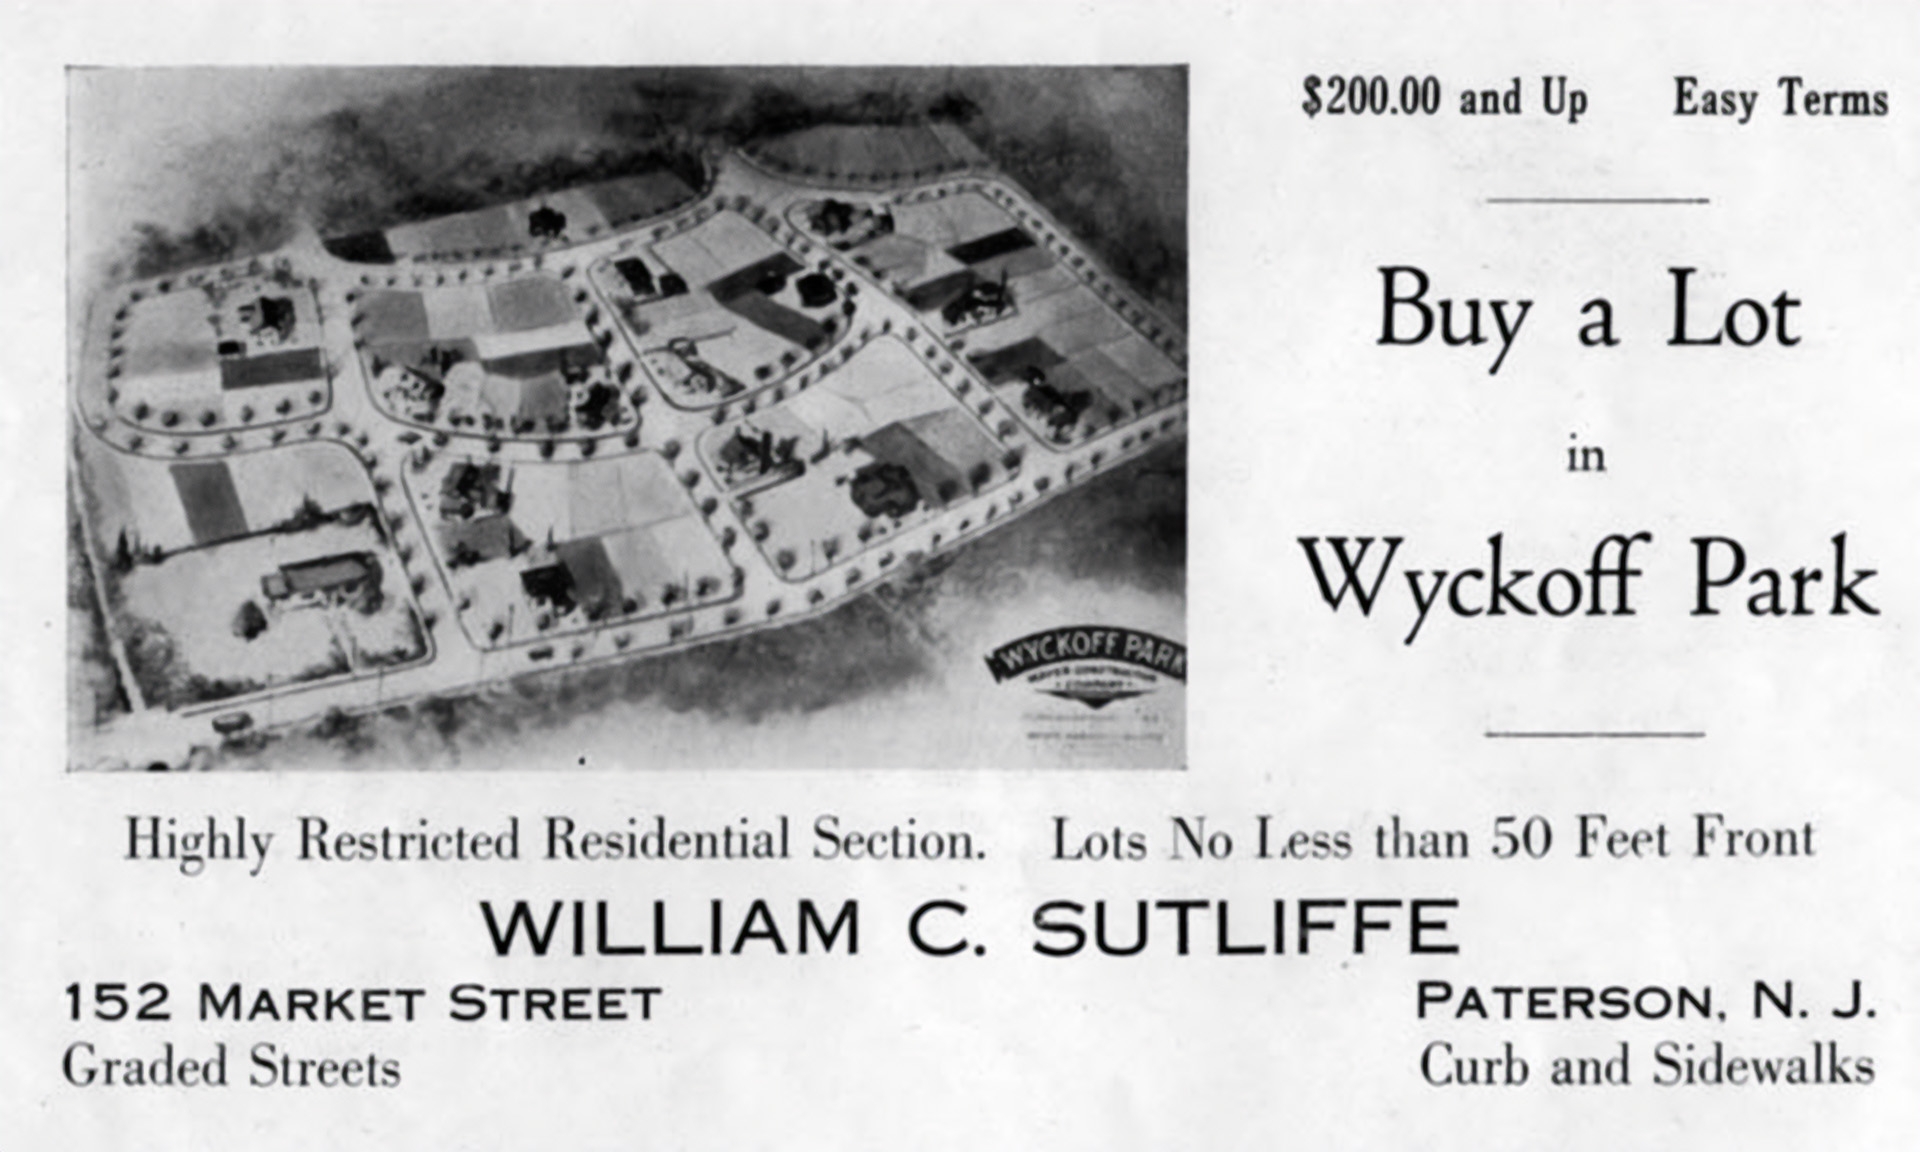 This advertisement from 1923 is one of several plans to develop Wyckoff Housing. The most famous was the acquisition of the triangle of land by Main Street, Wyckoff Avenue, and Franklin Avenue in Paterson, New Jersey by Real Estate developer Cornelius Vreeland in 1870, after the railroad reached town. He laid out streets and building lots, but only a few homes were built, including his own on Clinton Avenue.